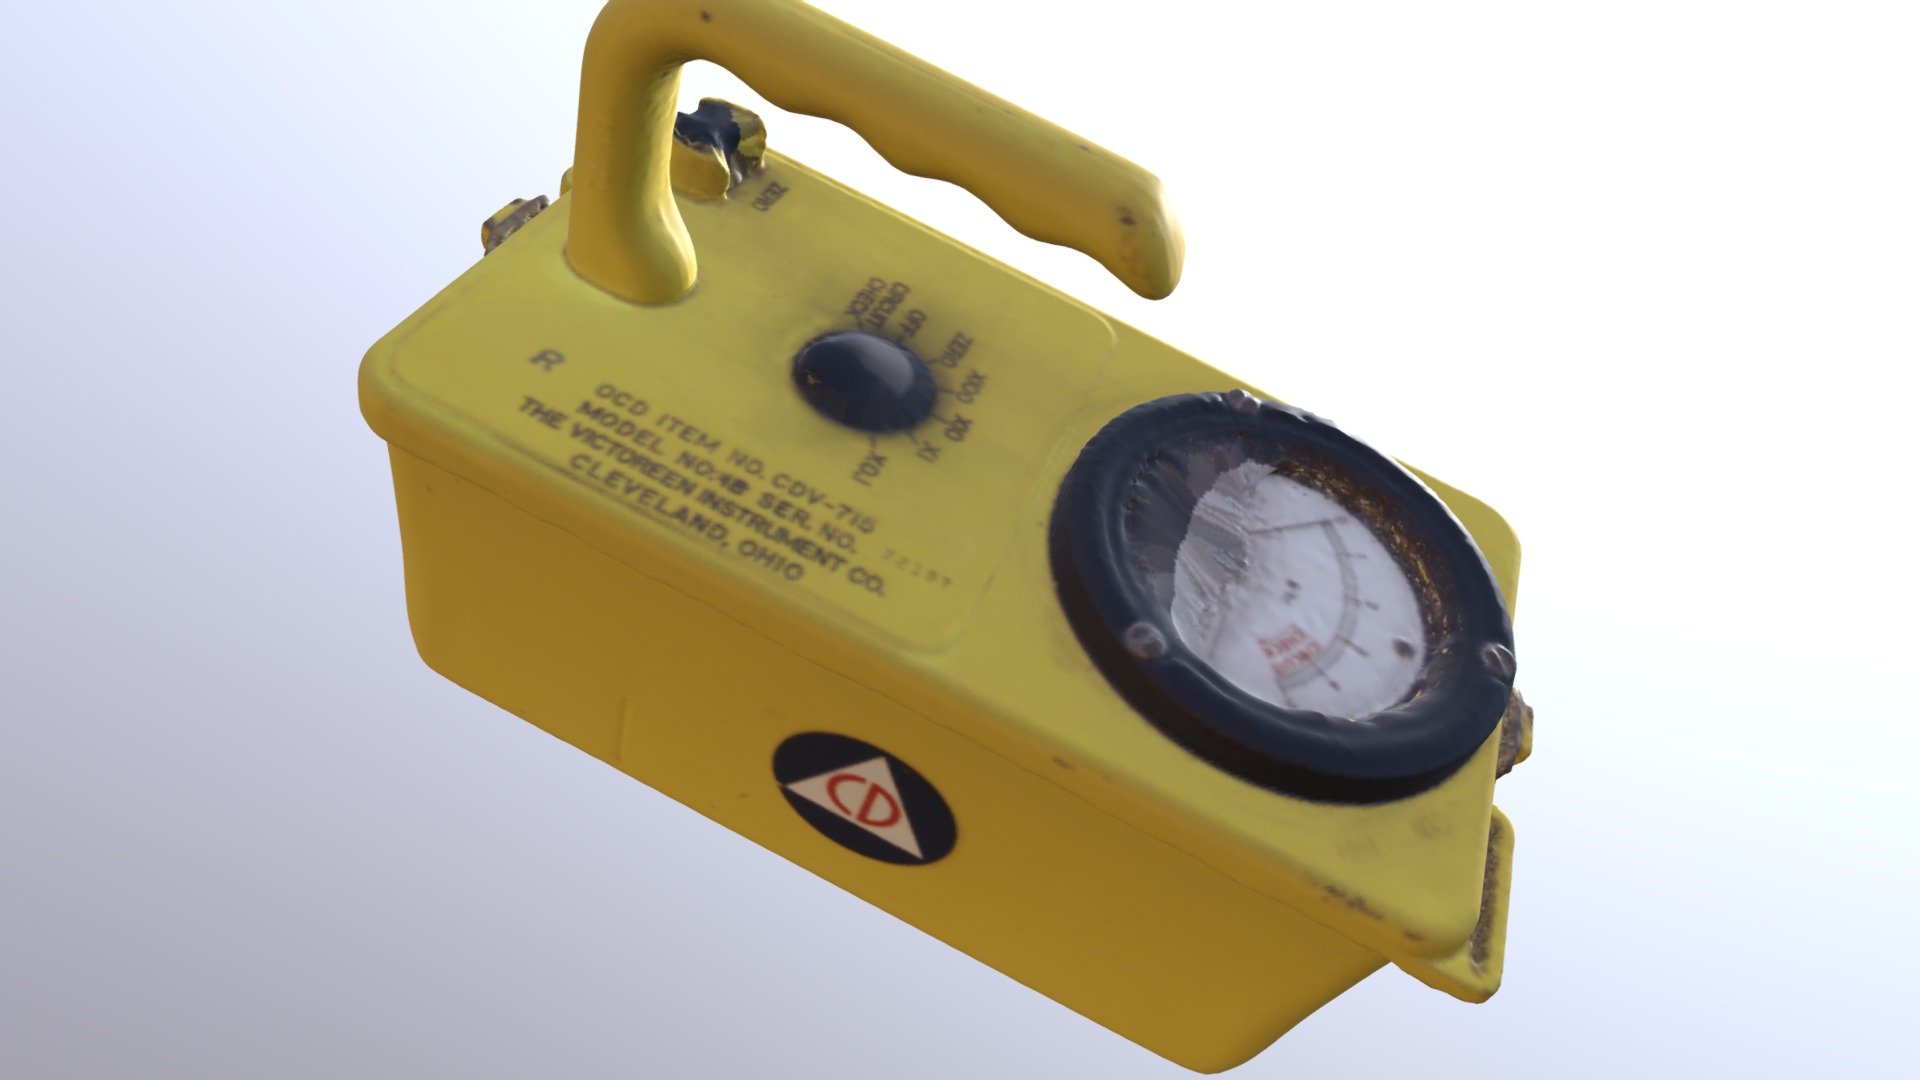 This 1950s-era Geiger counter is part of a Cold War exhibit at the Isle of WIght County Museum in Smithfield, Virginia. It was 3-D scanned with a Go!Scan 50. Reflective or black portions of the Geiger counter did not scan properly. Courtesy of the Isle of Wight County Museum 3d model